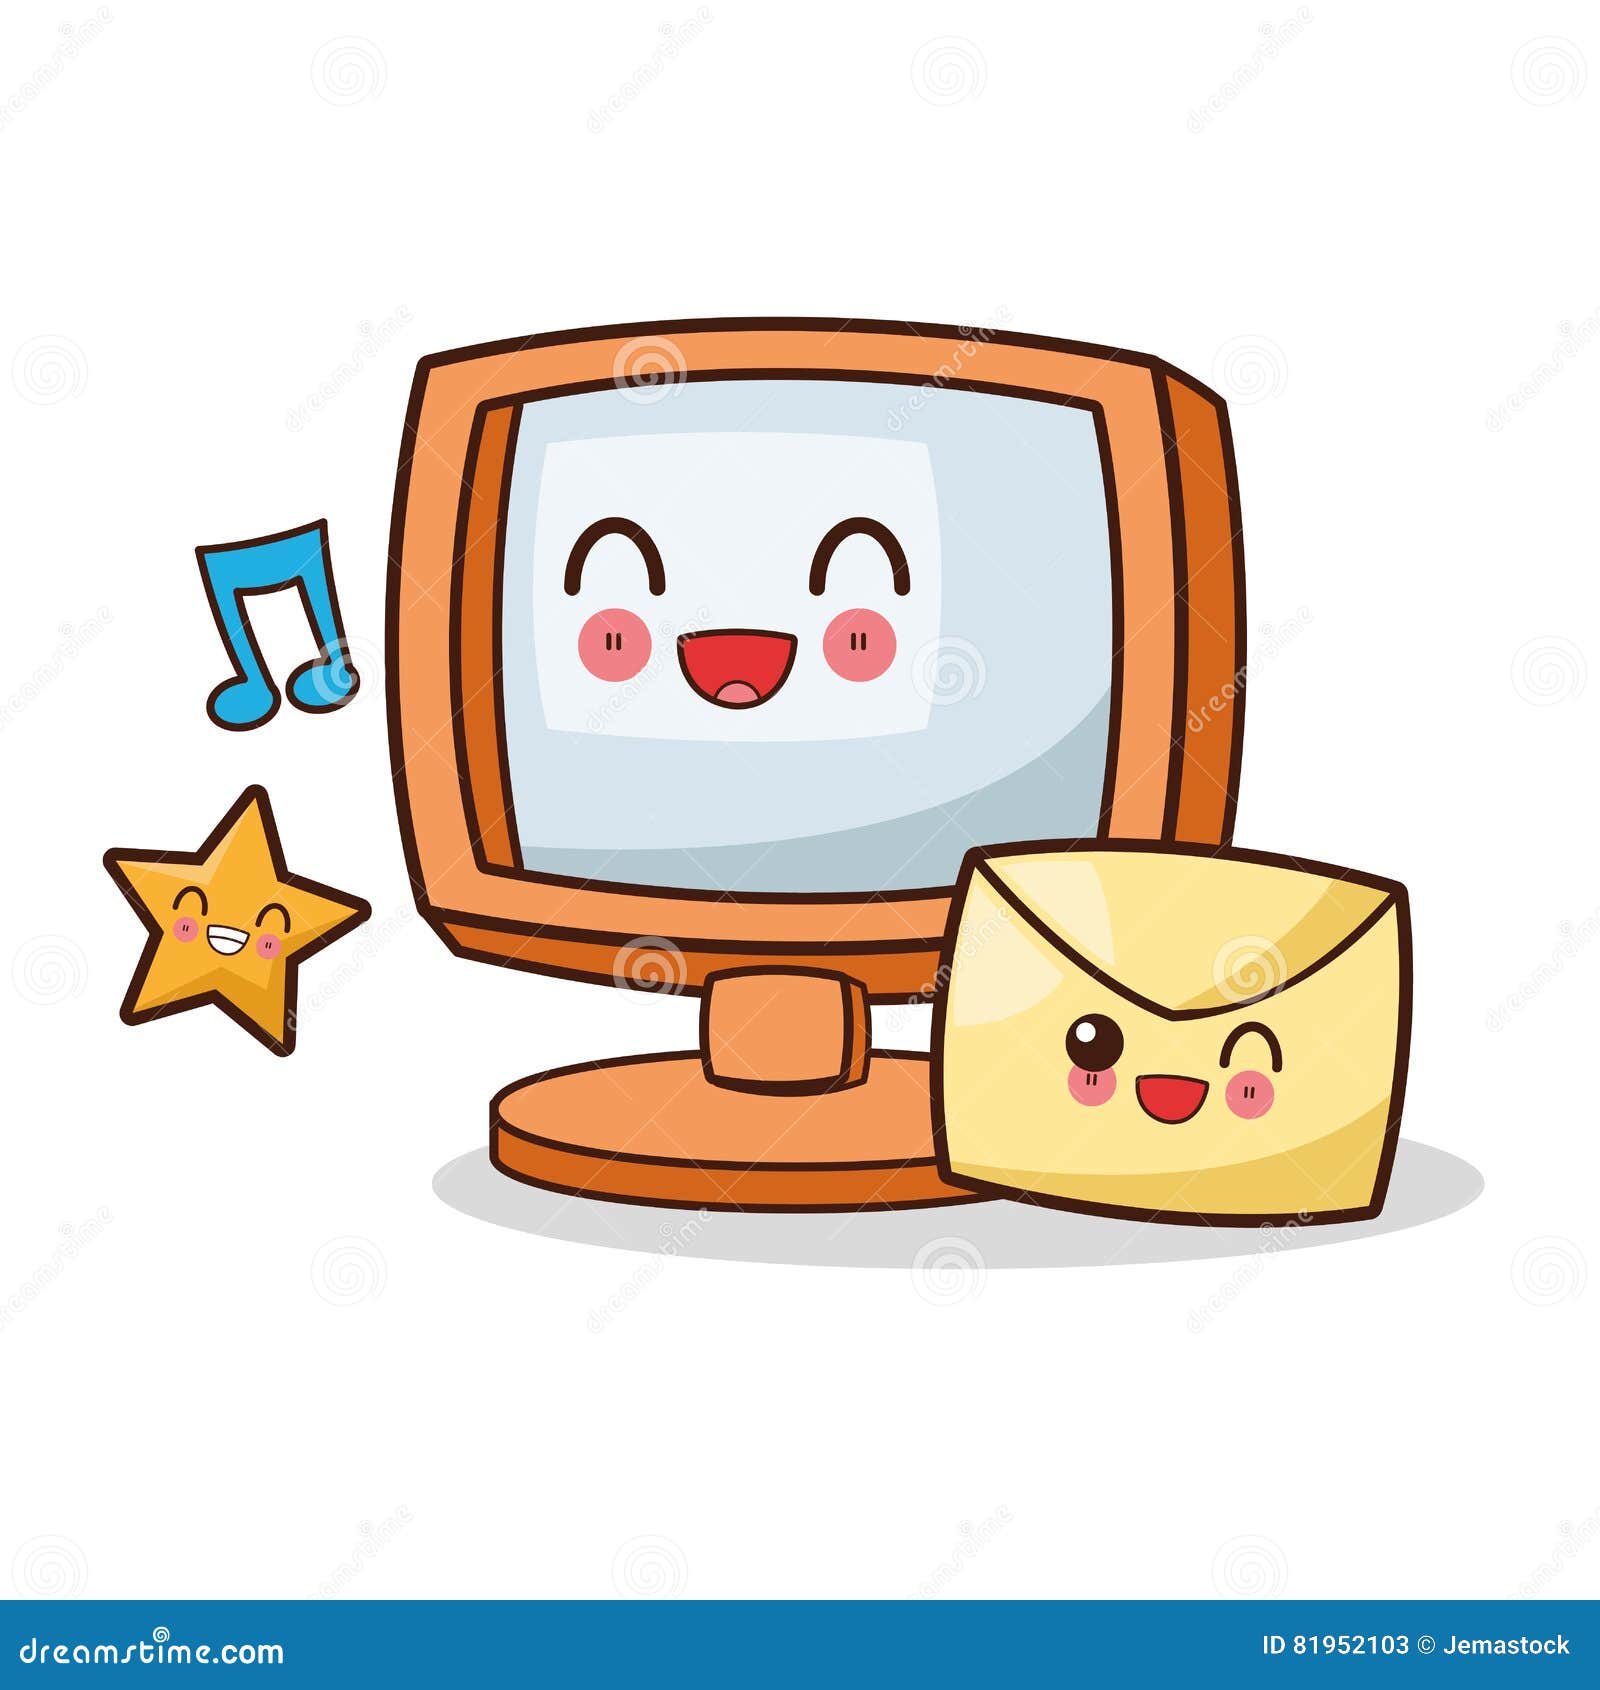 Isolated Kawaii Computer Design Stock Vector - Illustration of funny ...